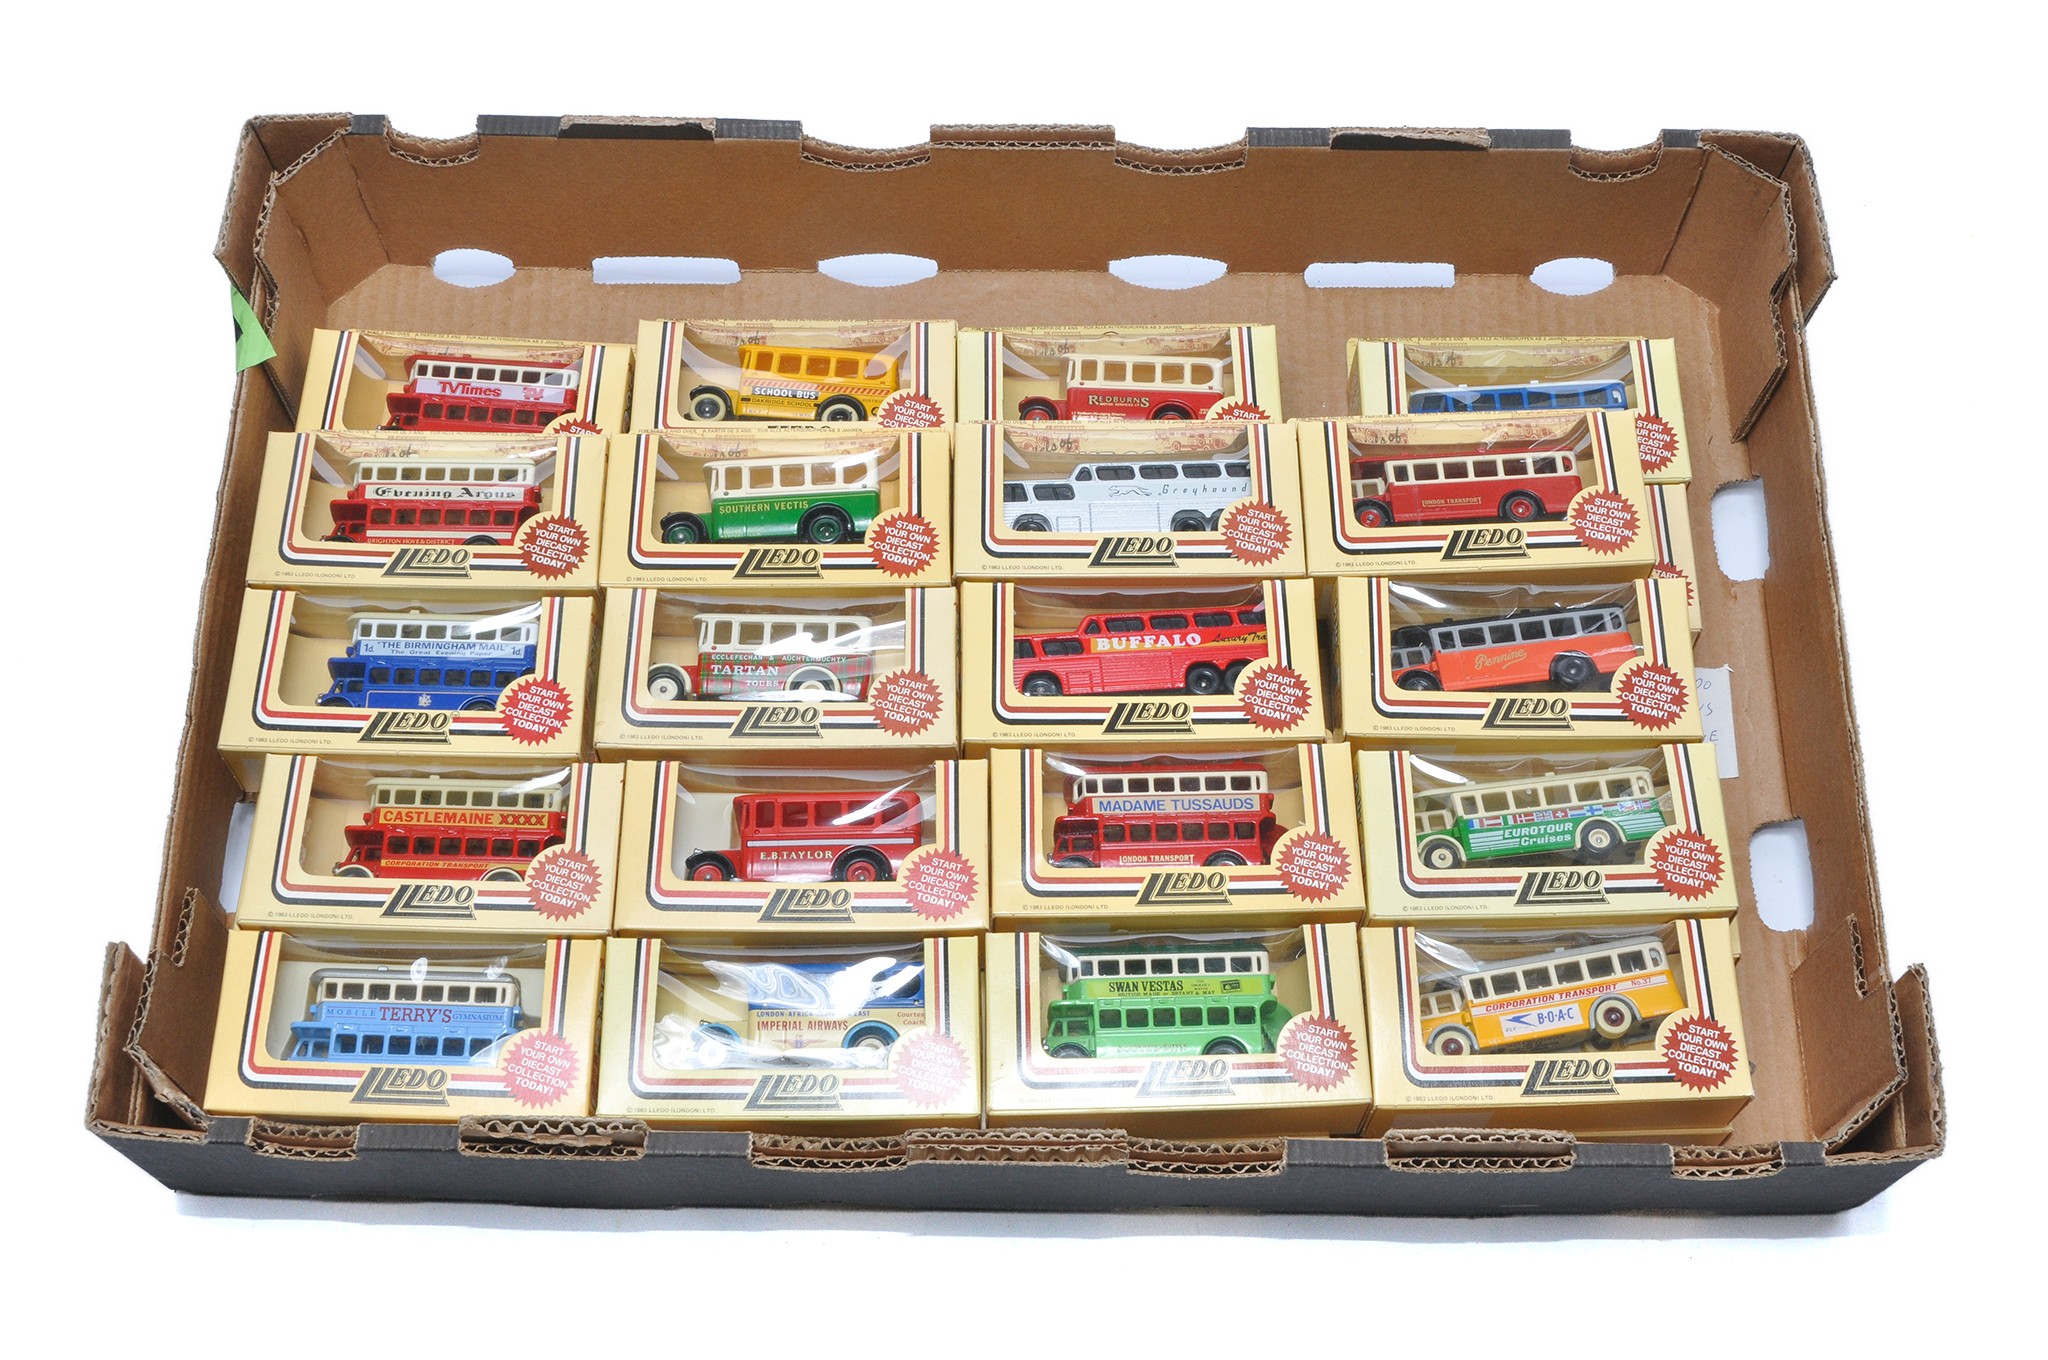 A quantity of 36 Lledo days promotional diecast (Bus / Coach) vehicles in boxes. Contained in a